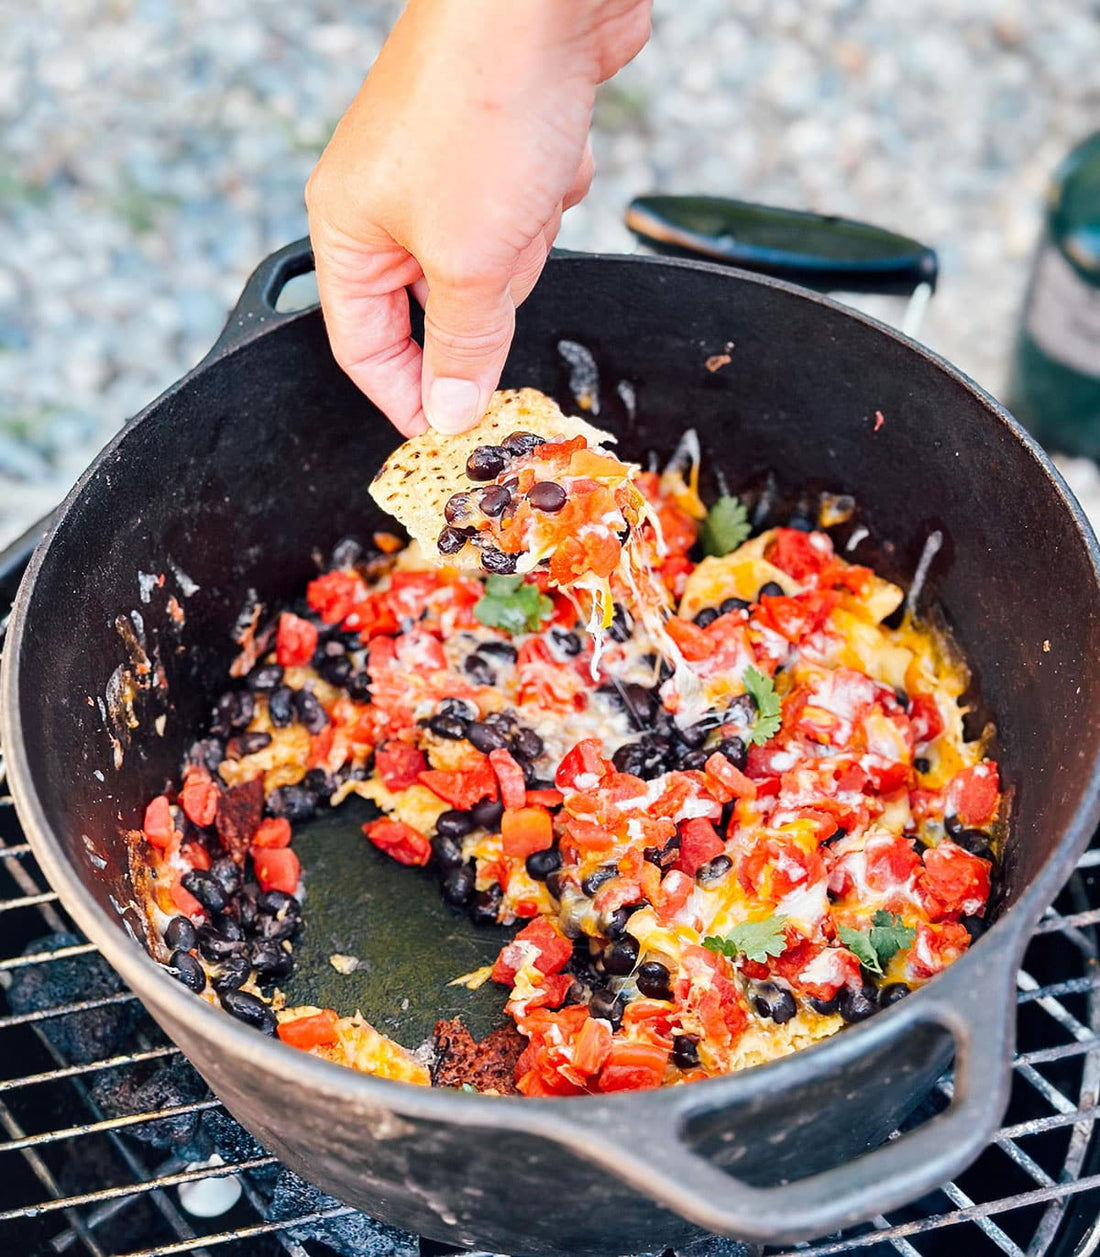 Bonfire, Stove and Fire Pit: Forget Campfire Fiasco, Feast on Campfire Nachos